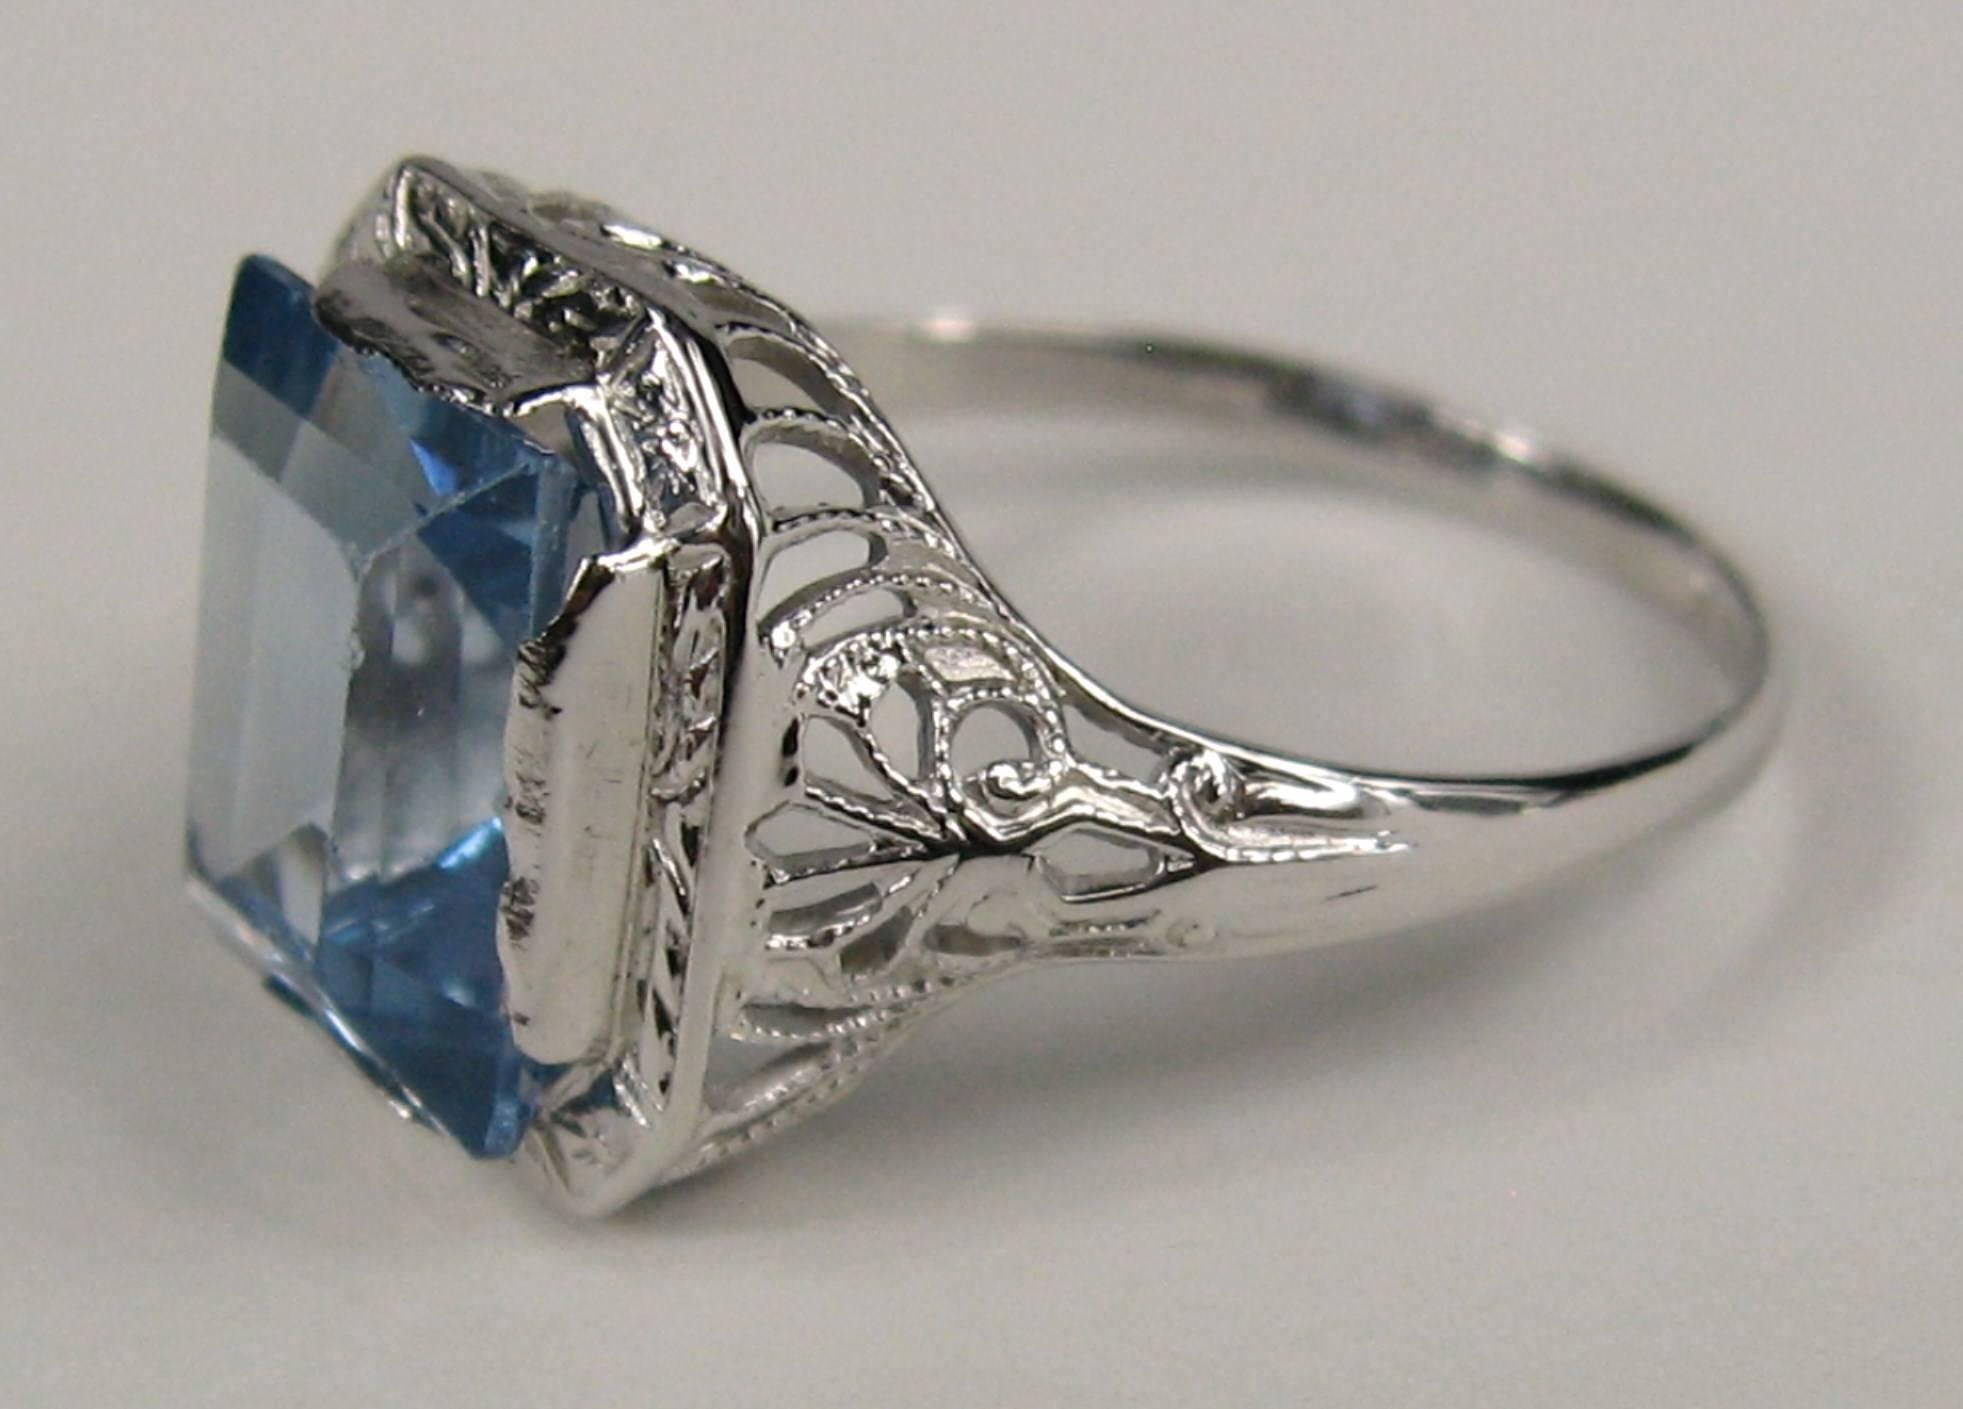 Stunning Open cut work on this 1920's Ring. Emerald-Cut blue topaz set in 14K White Gold. Ring measures 1/2 inch top to bottom or 13mm. The ring is a size 6-3/4 and can be sized by us or your jeweler. This is out of a massive collection of New Old